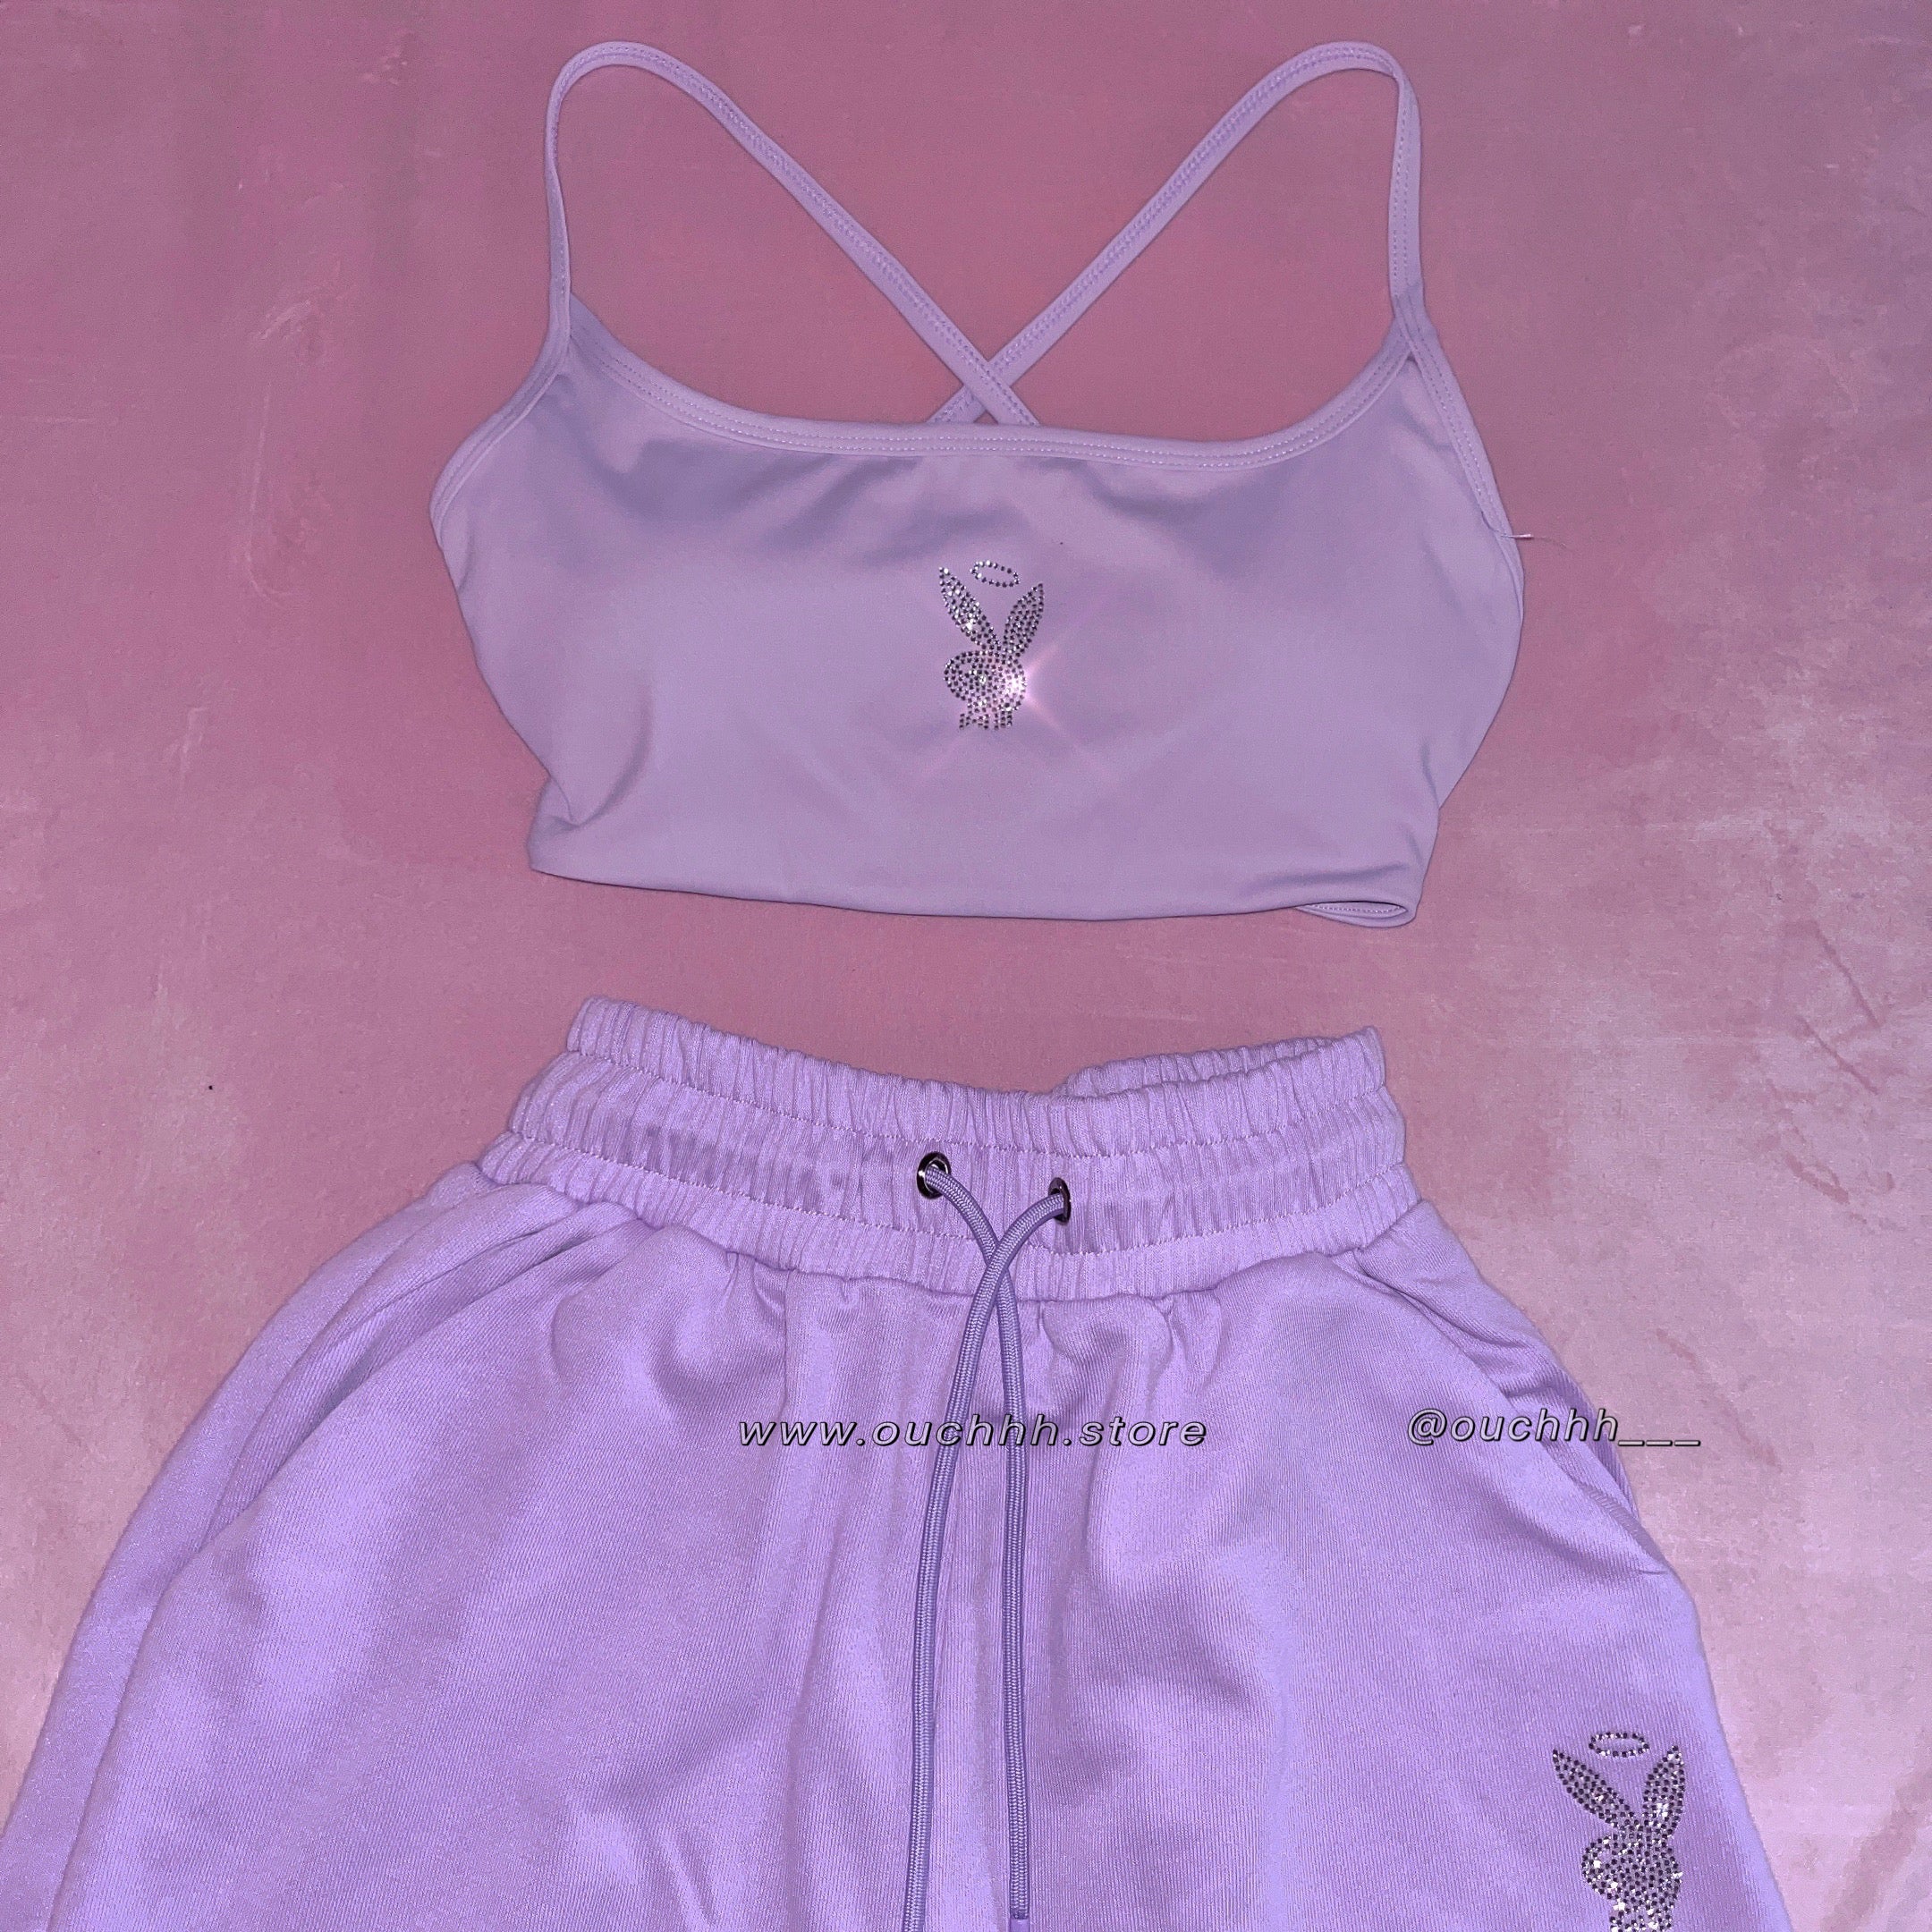 Play Angel Bralette Sweatpants Matching Set (Lilac) (Sold Separately)